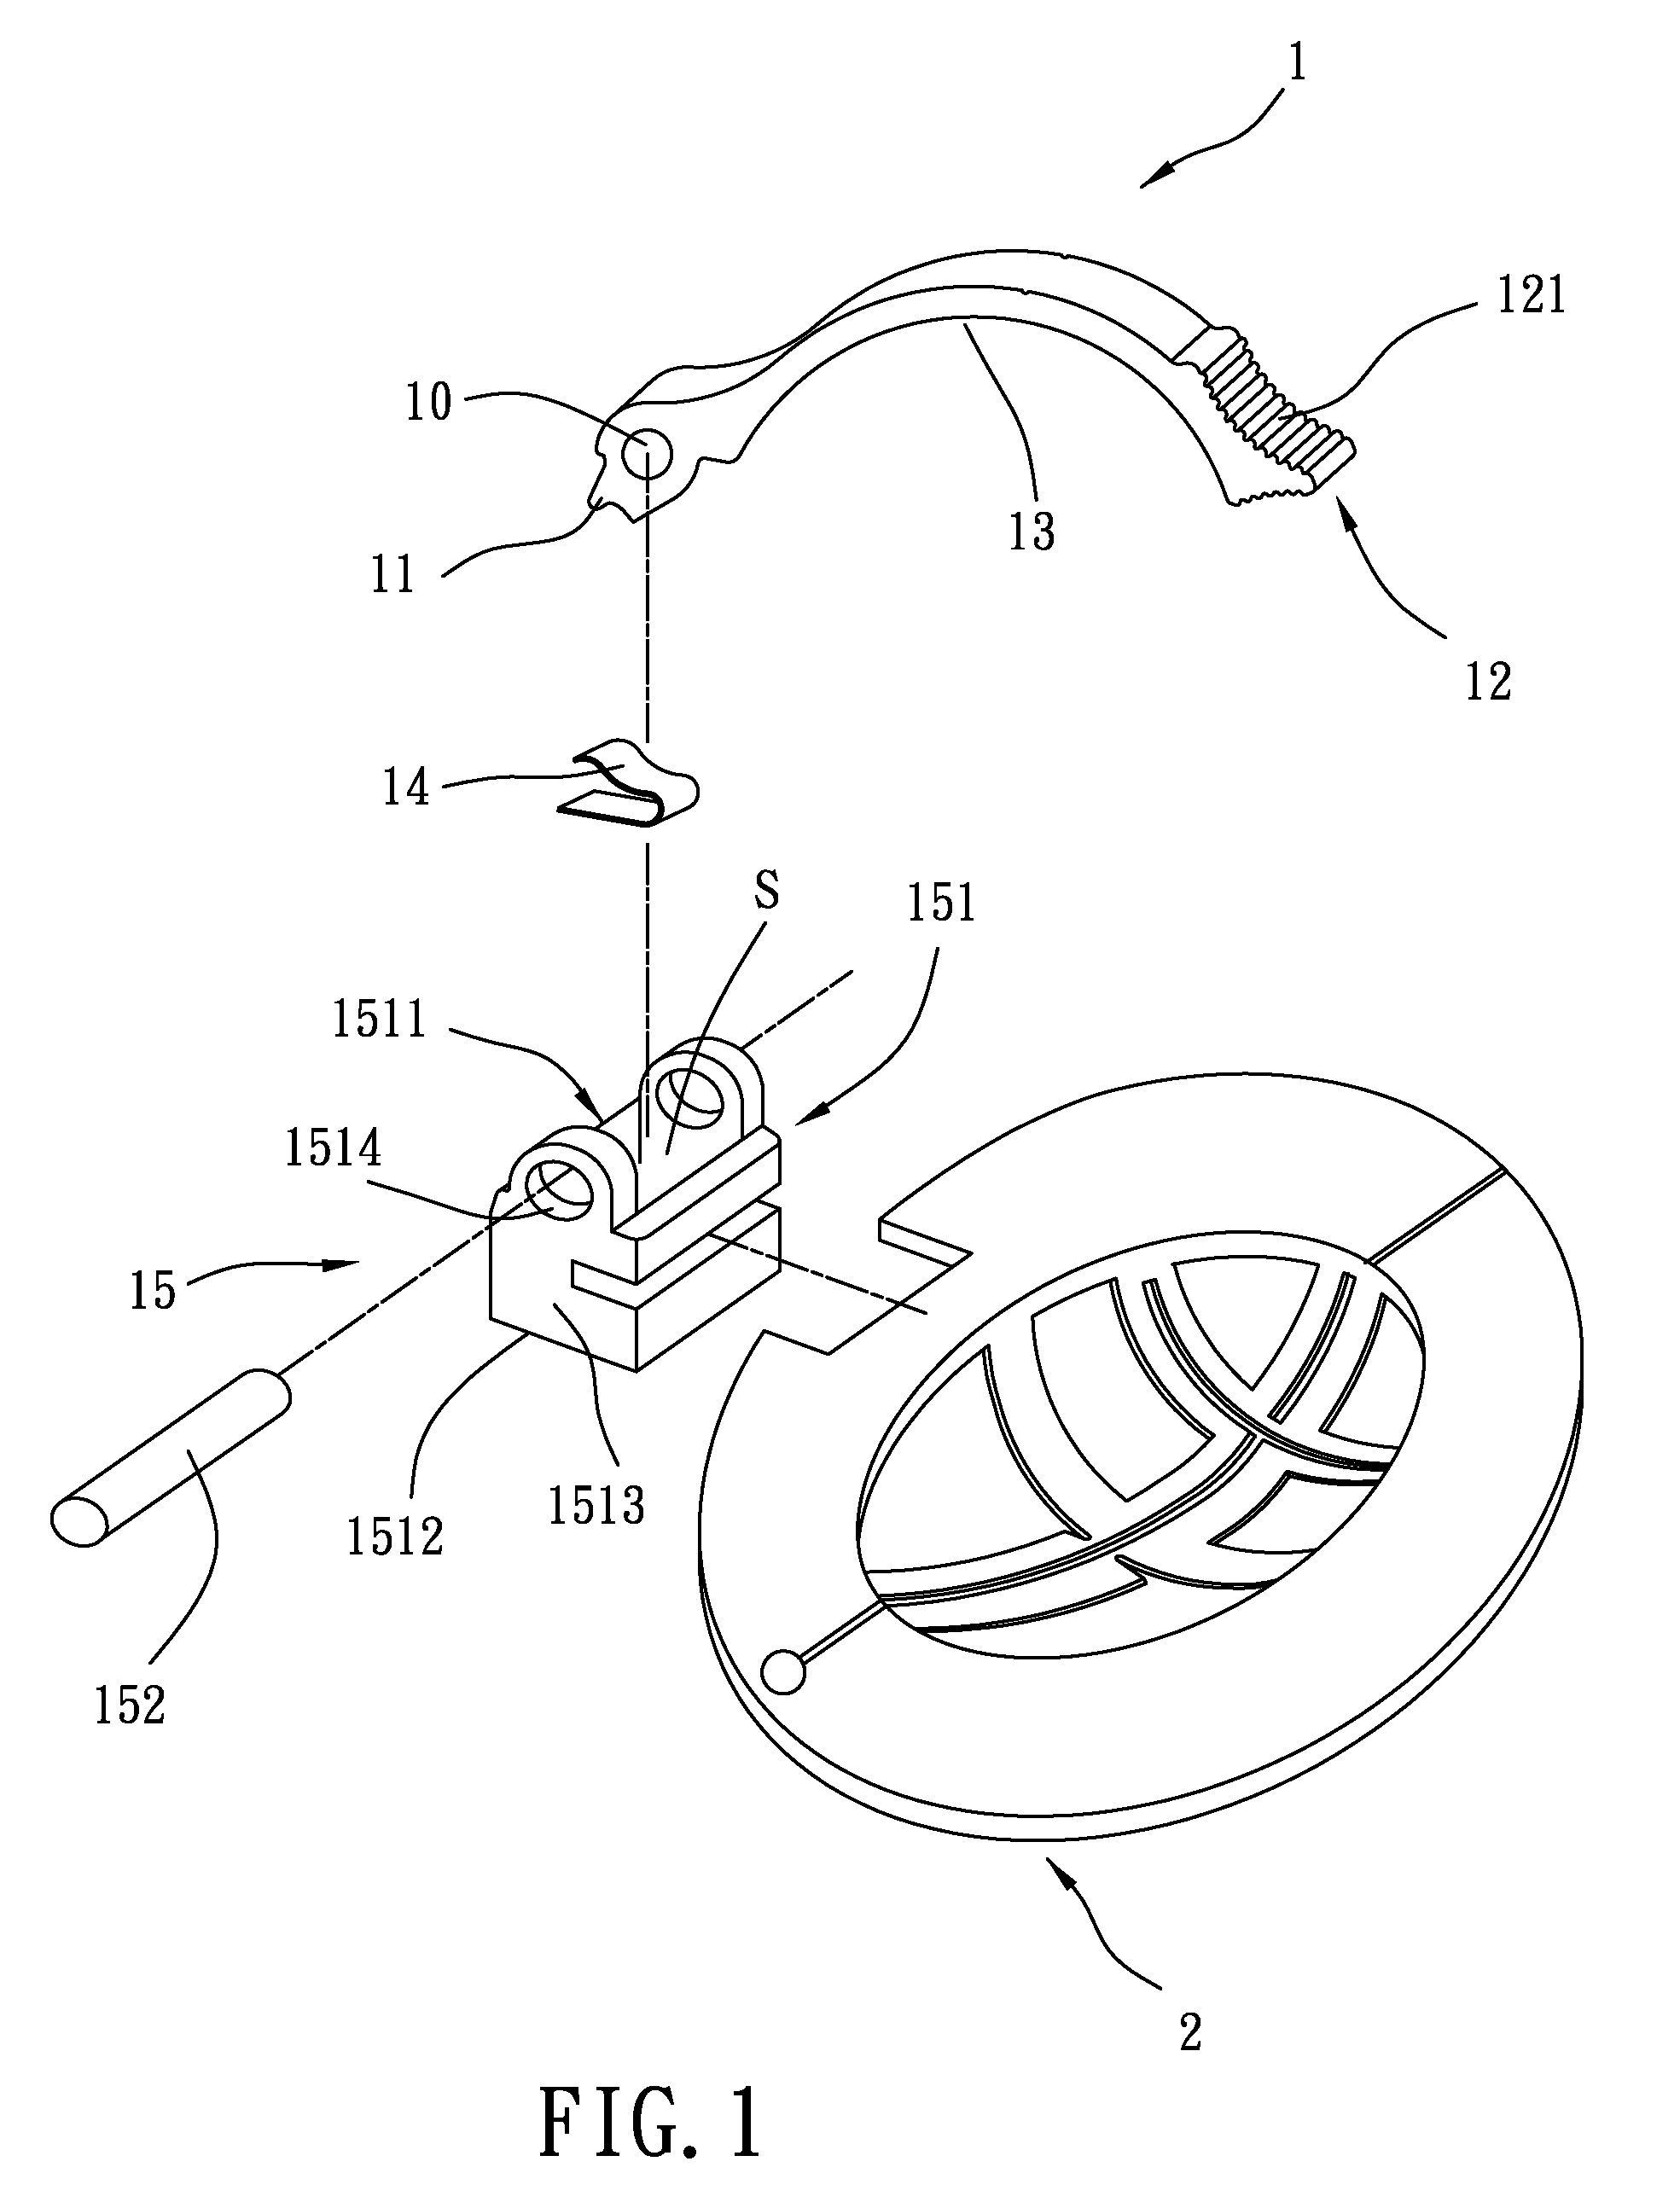 Combination ball clip and ball liner and ball clip for use with a ball liner